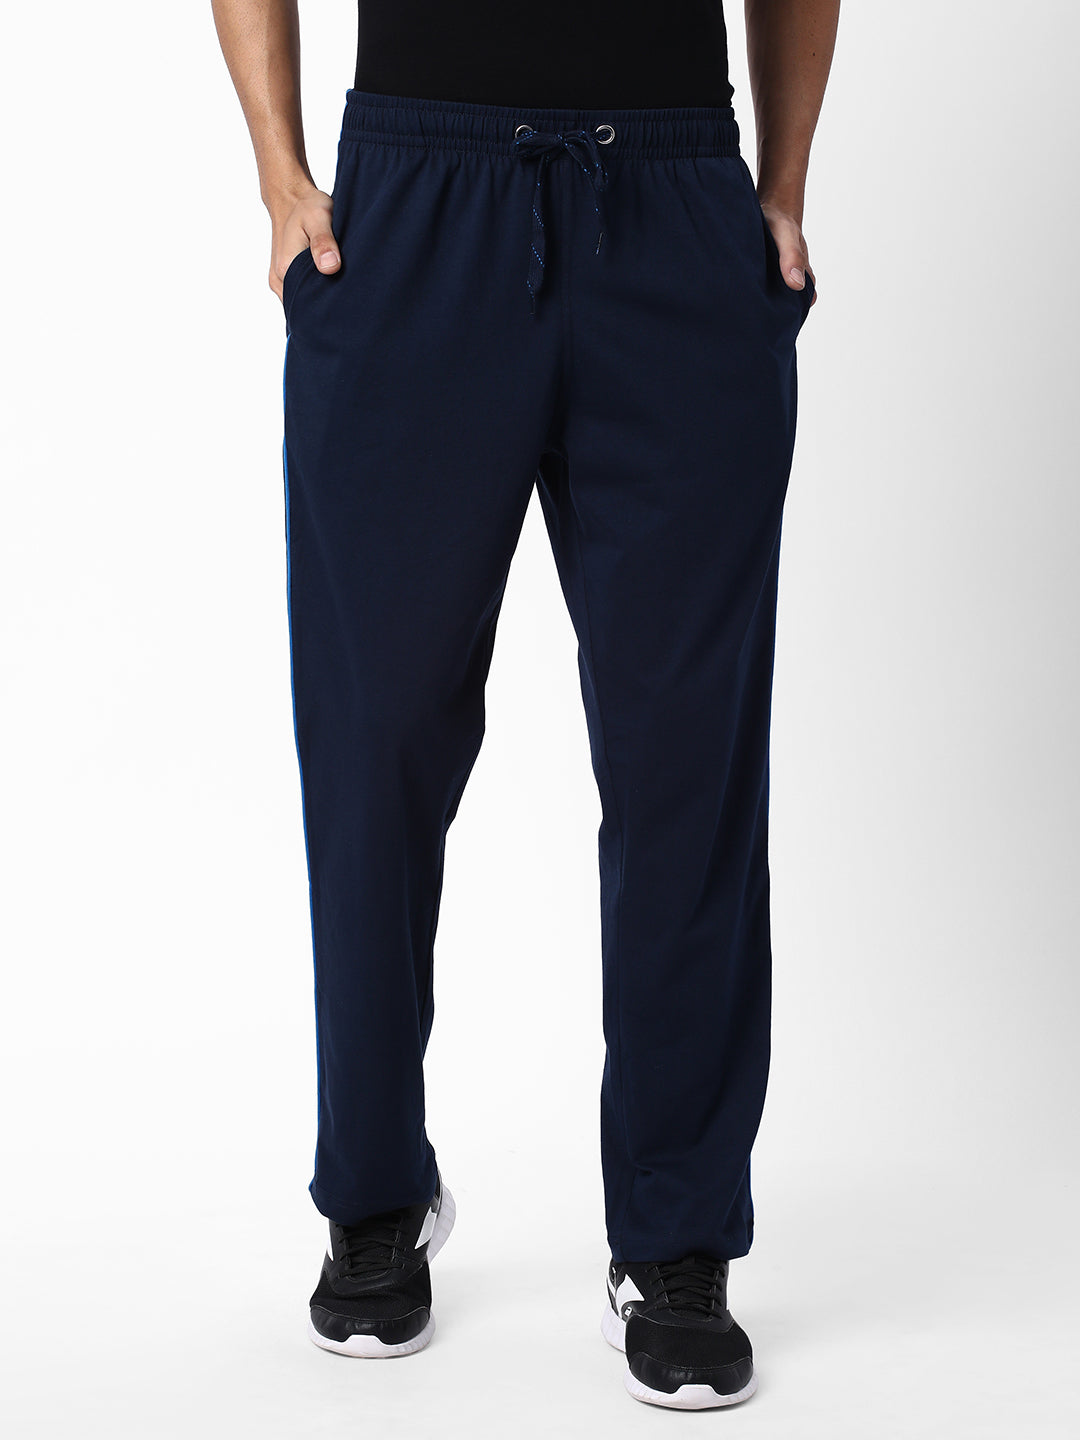 Cotstyle Men's Super Combed Cotton Regular-Fit Track Pants with Side Pocket, Colour Navy-Style no.TP1101